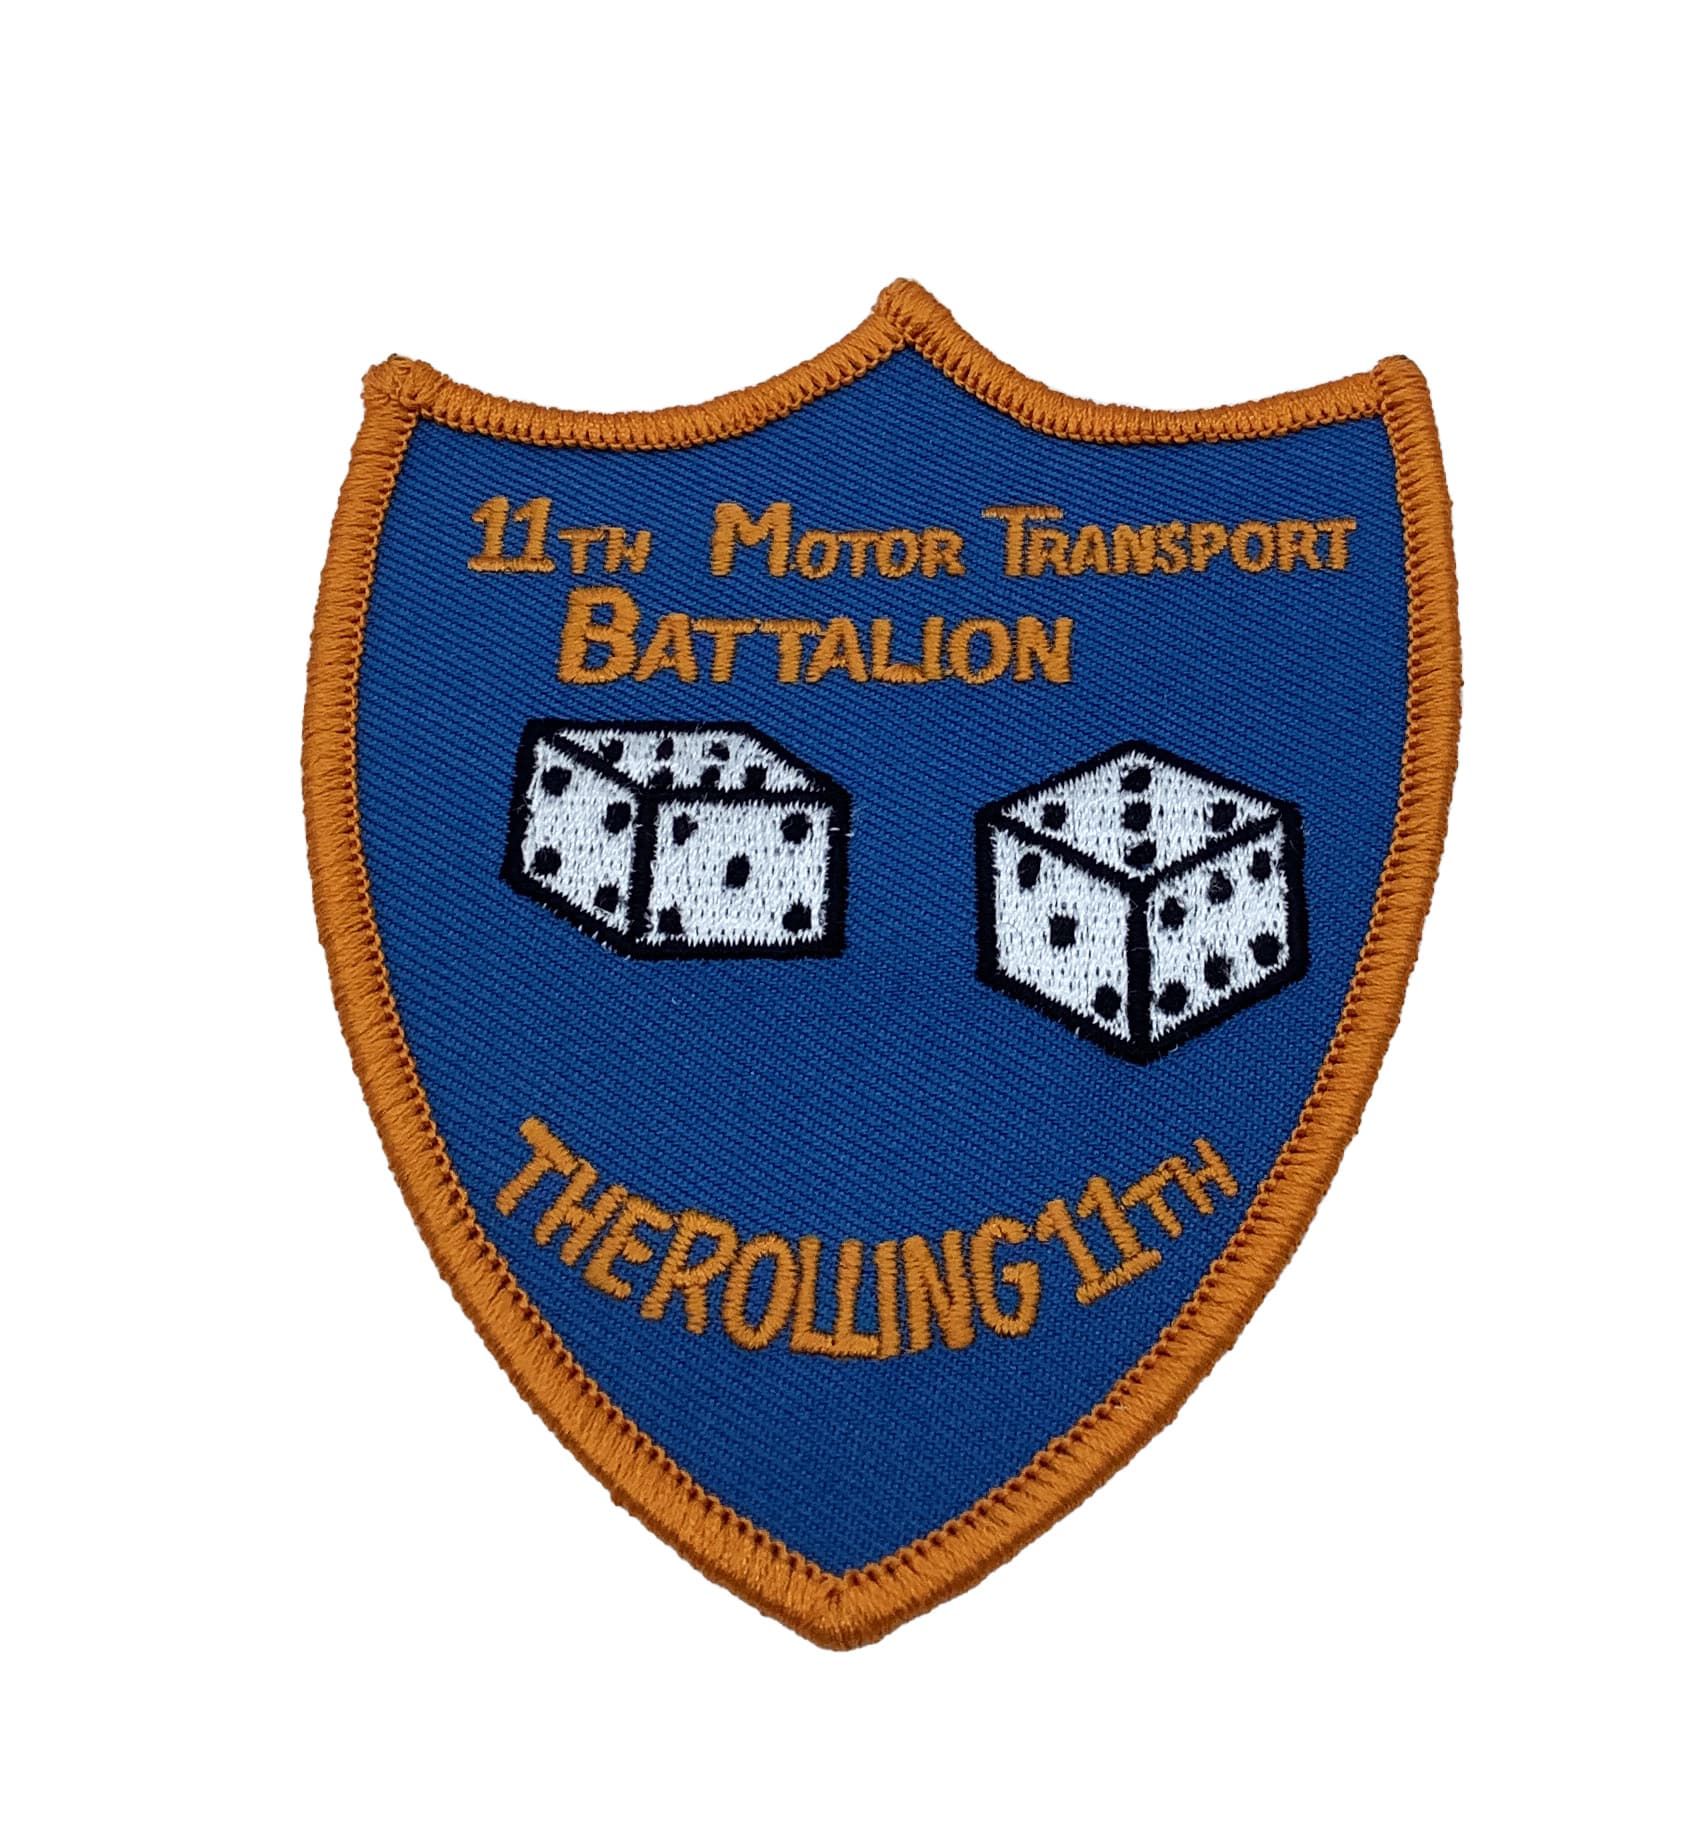 11th Motor Transport Bn Patch- Plastic Backing